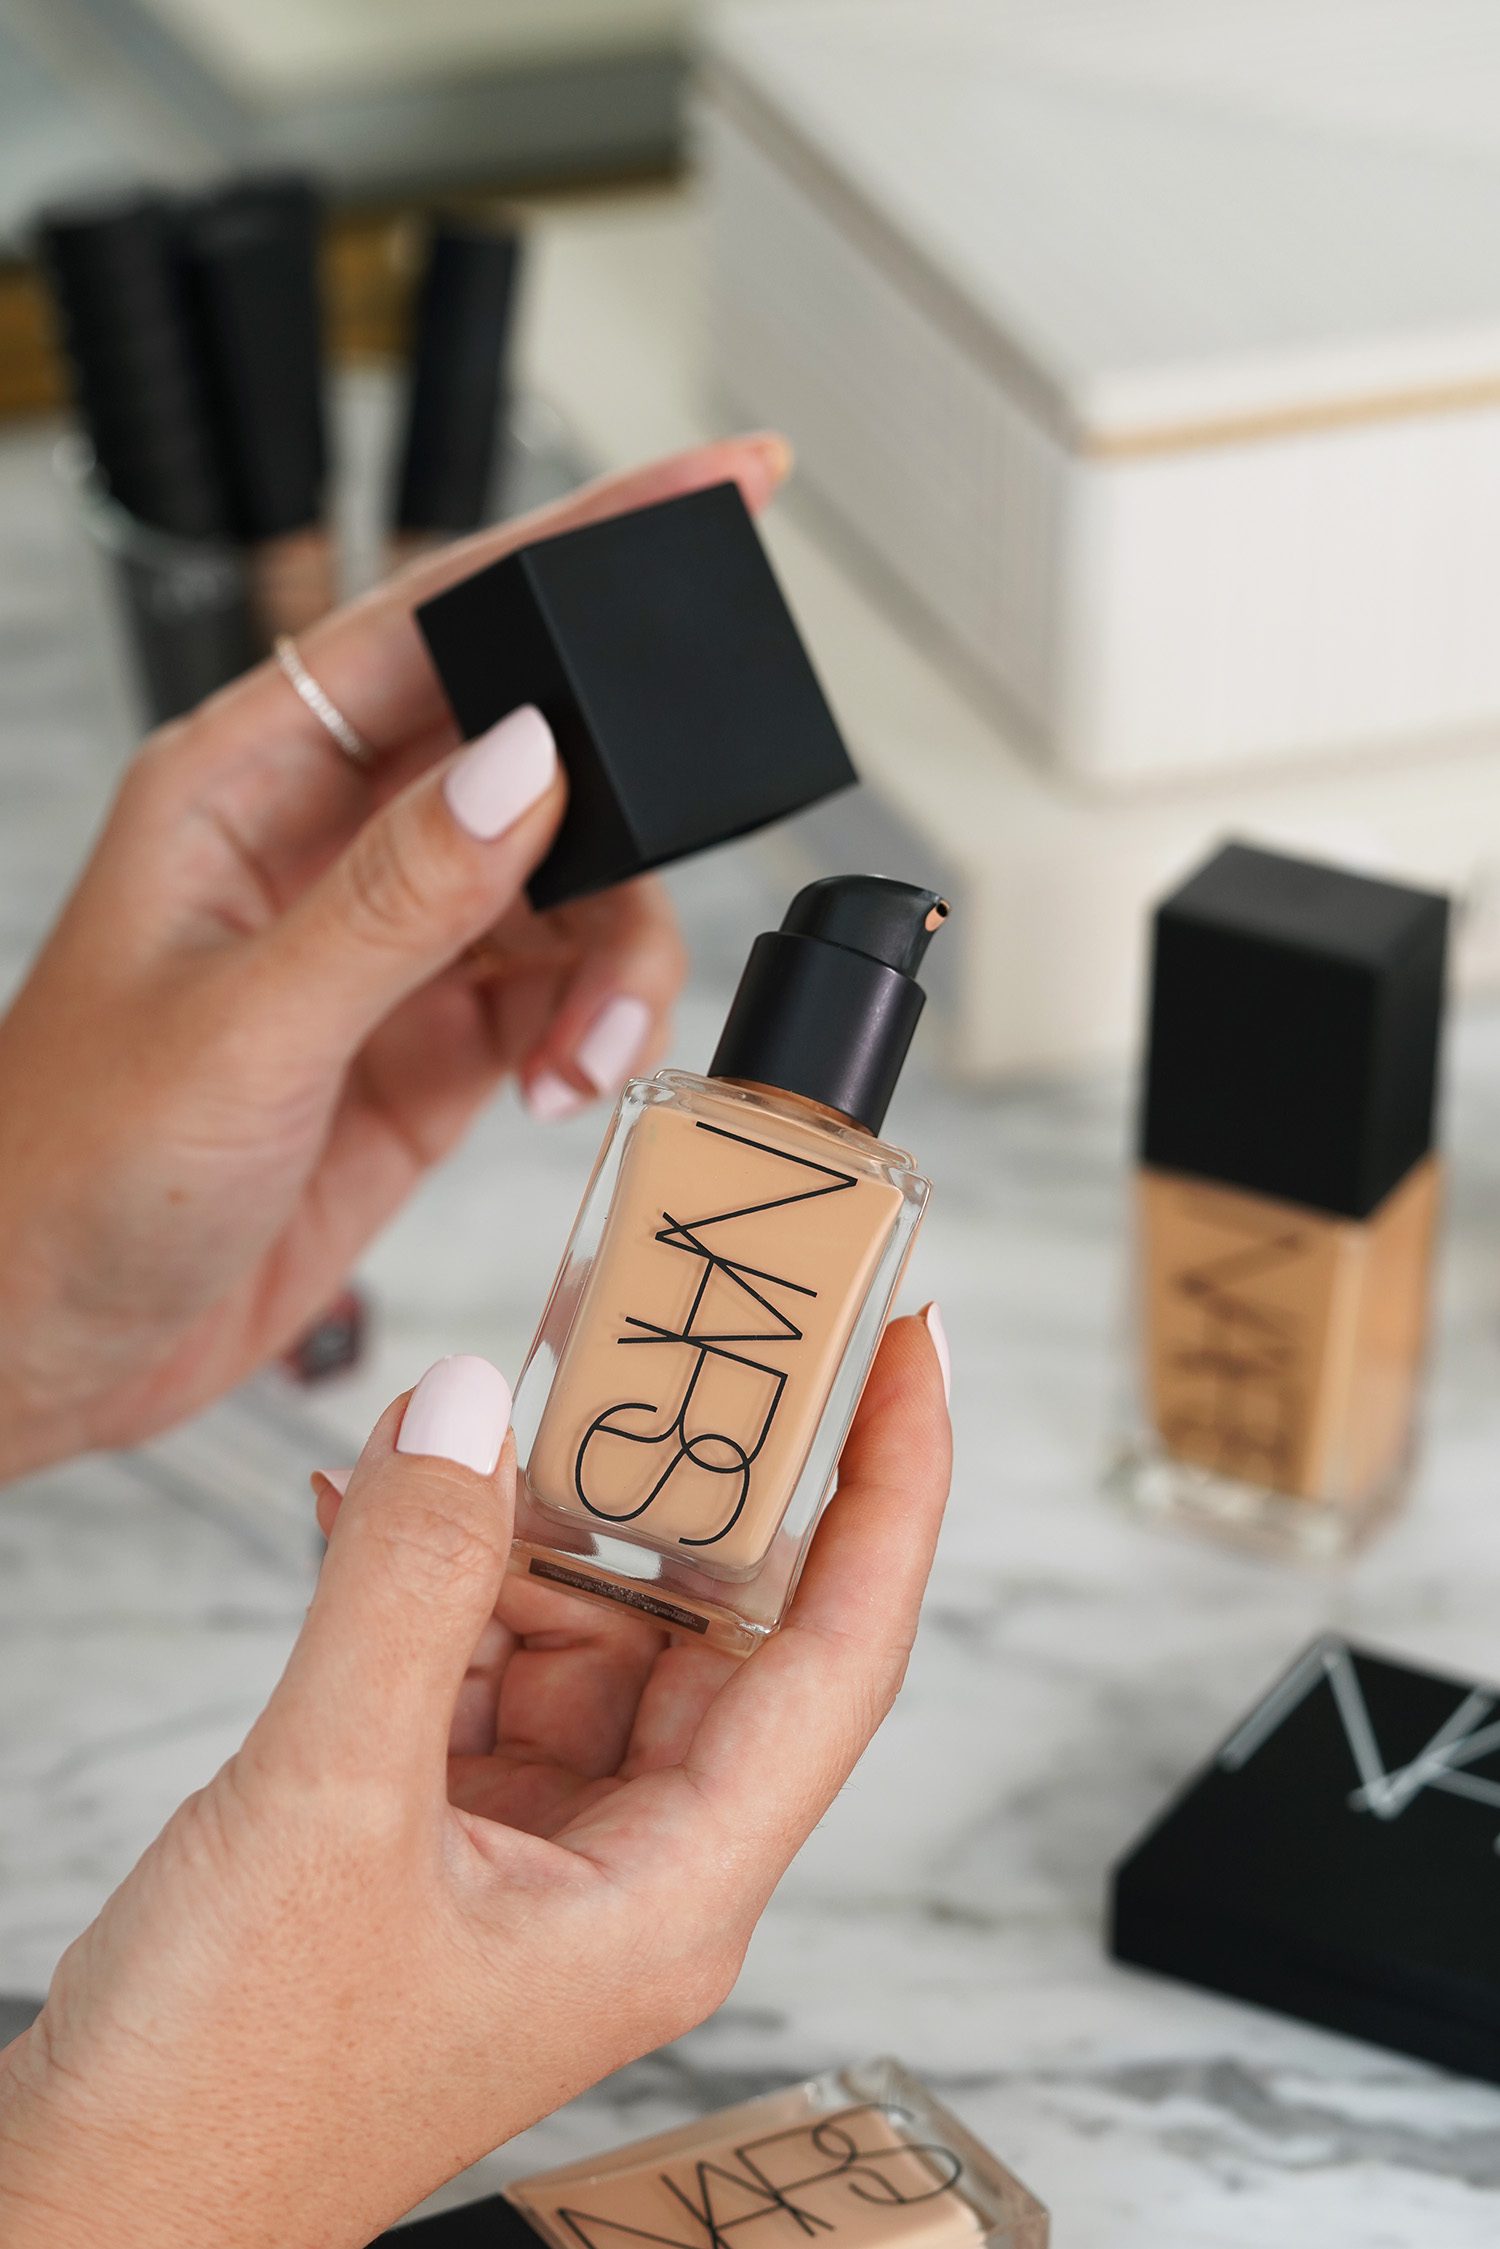 NARS Soft Matte Complete Foundation Review + Wear Test! 